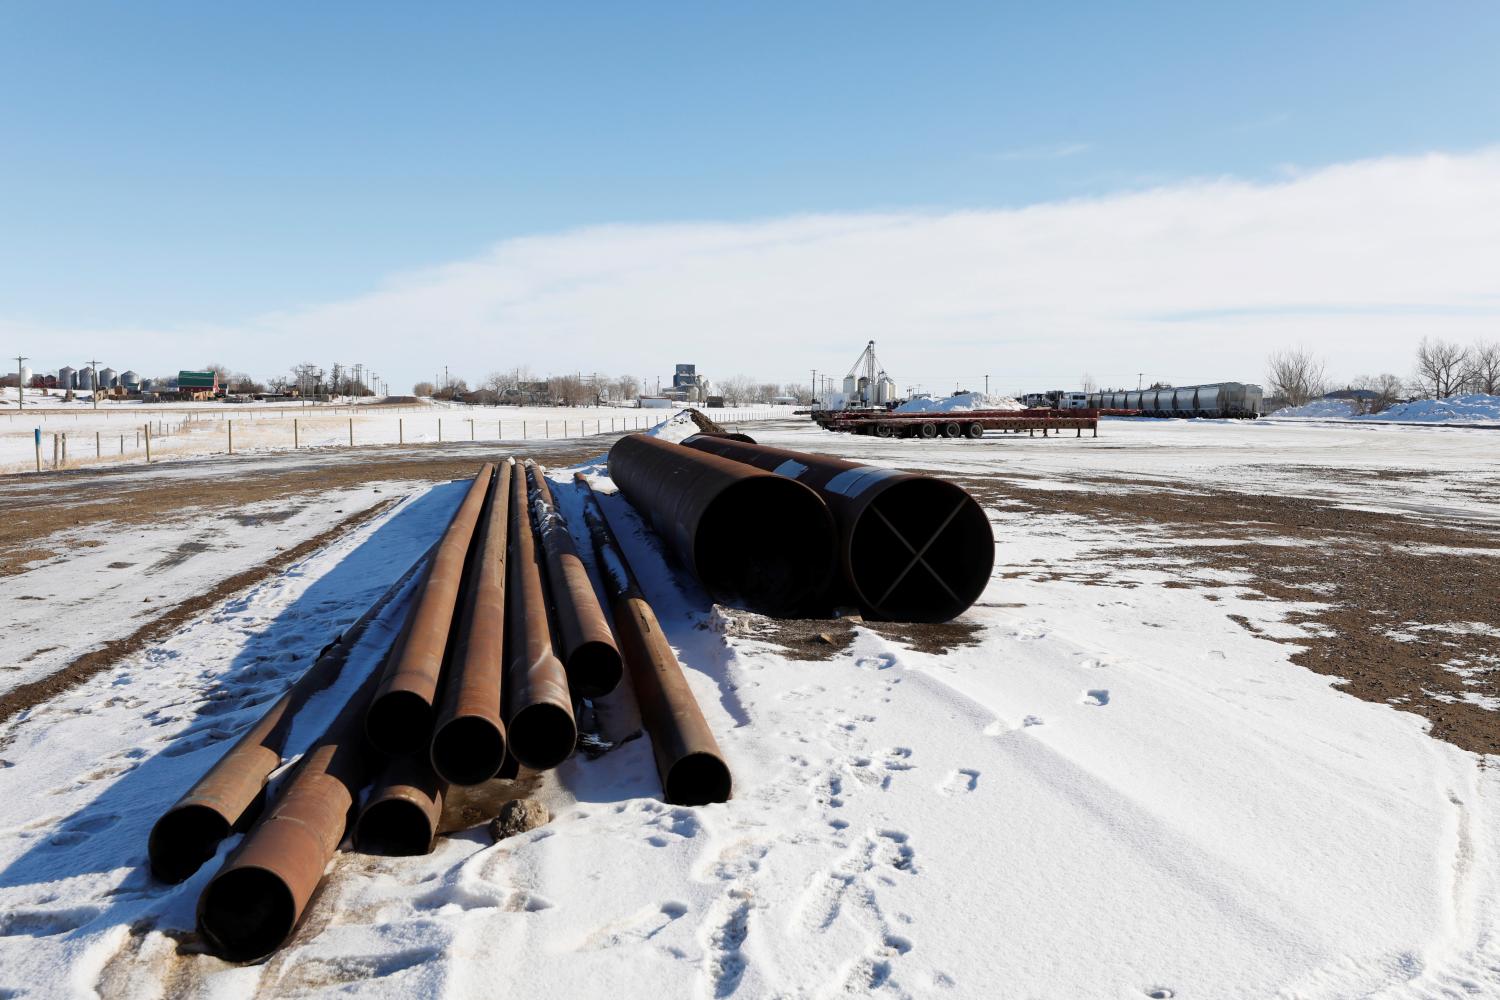 A supply depot servicing the Keystone XL crude oil pipeline lies idle in Oyen, Alberta, Canada February 1, 2021.  REUTERS/Todd Korol